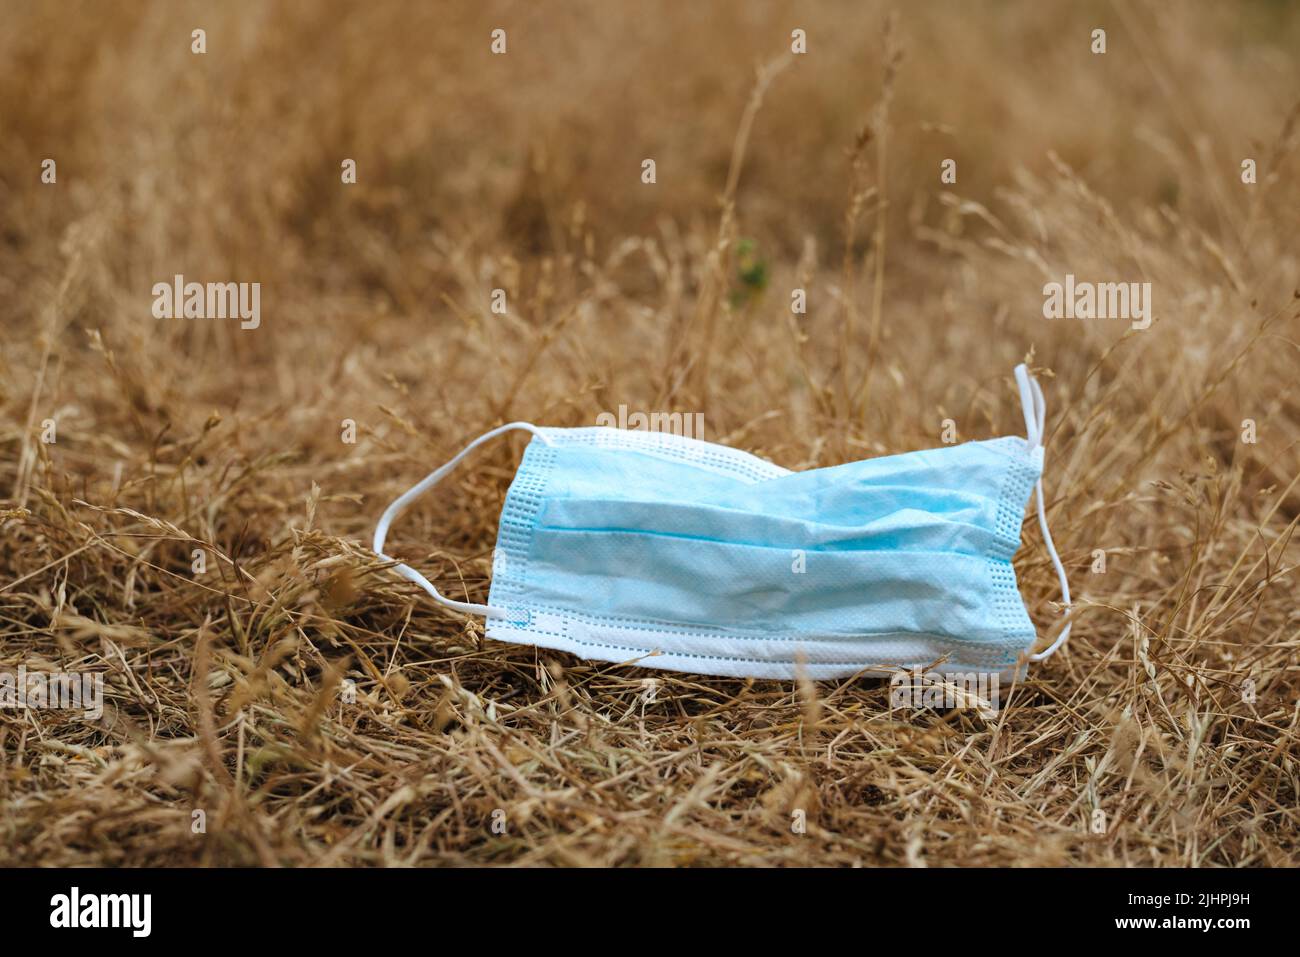 Waste during COVID-19. Blue Medical face mask thrown into nature in yellow grass. End of quarantine. Environmental pollution with plastic. Stock Photo